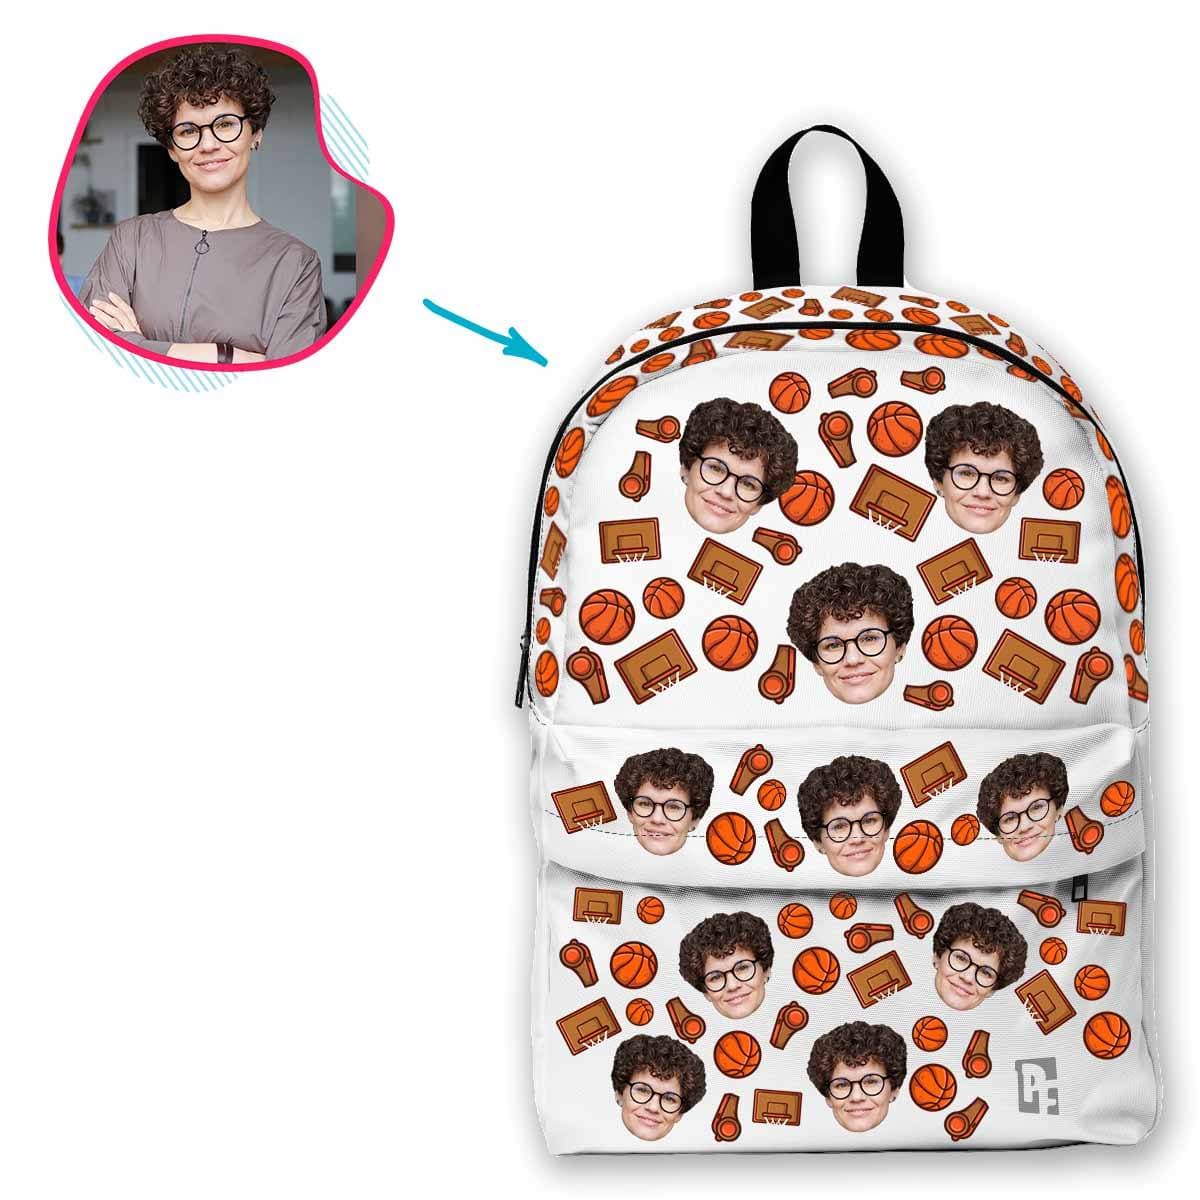 Personalized Basketball Backpack 